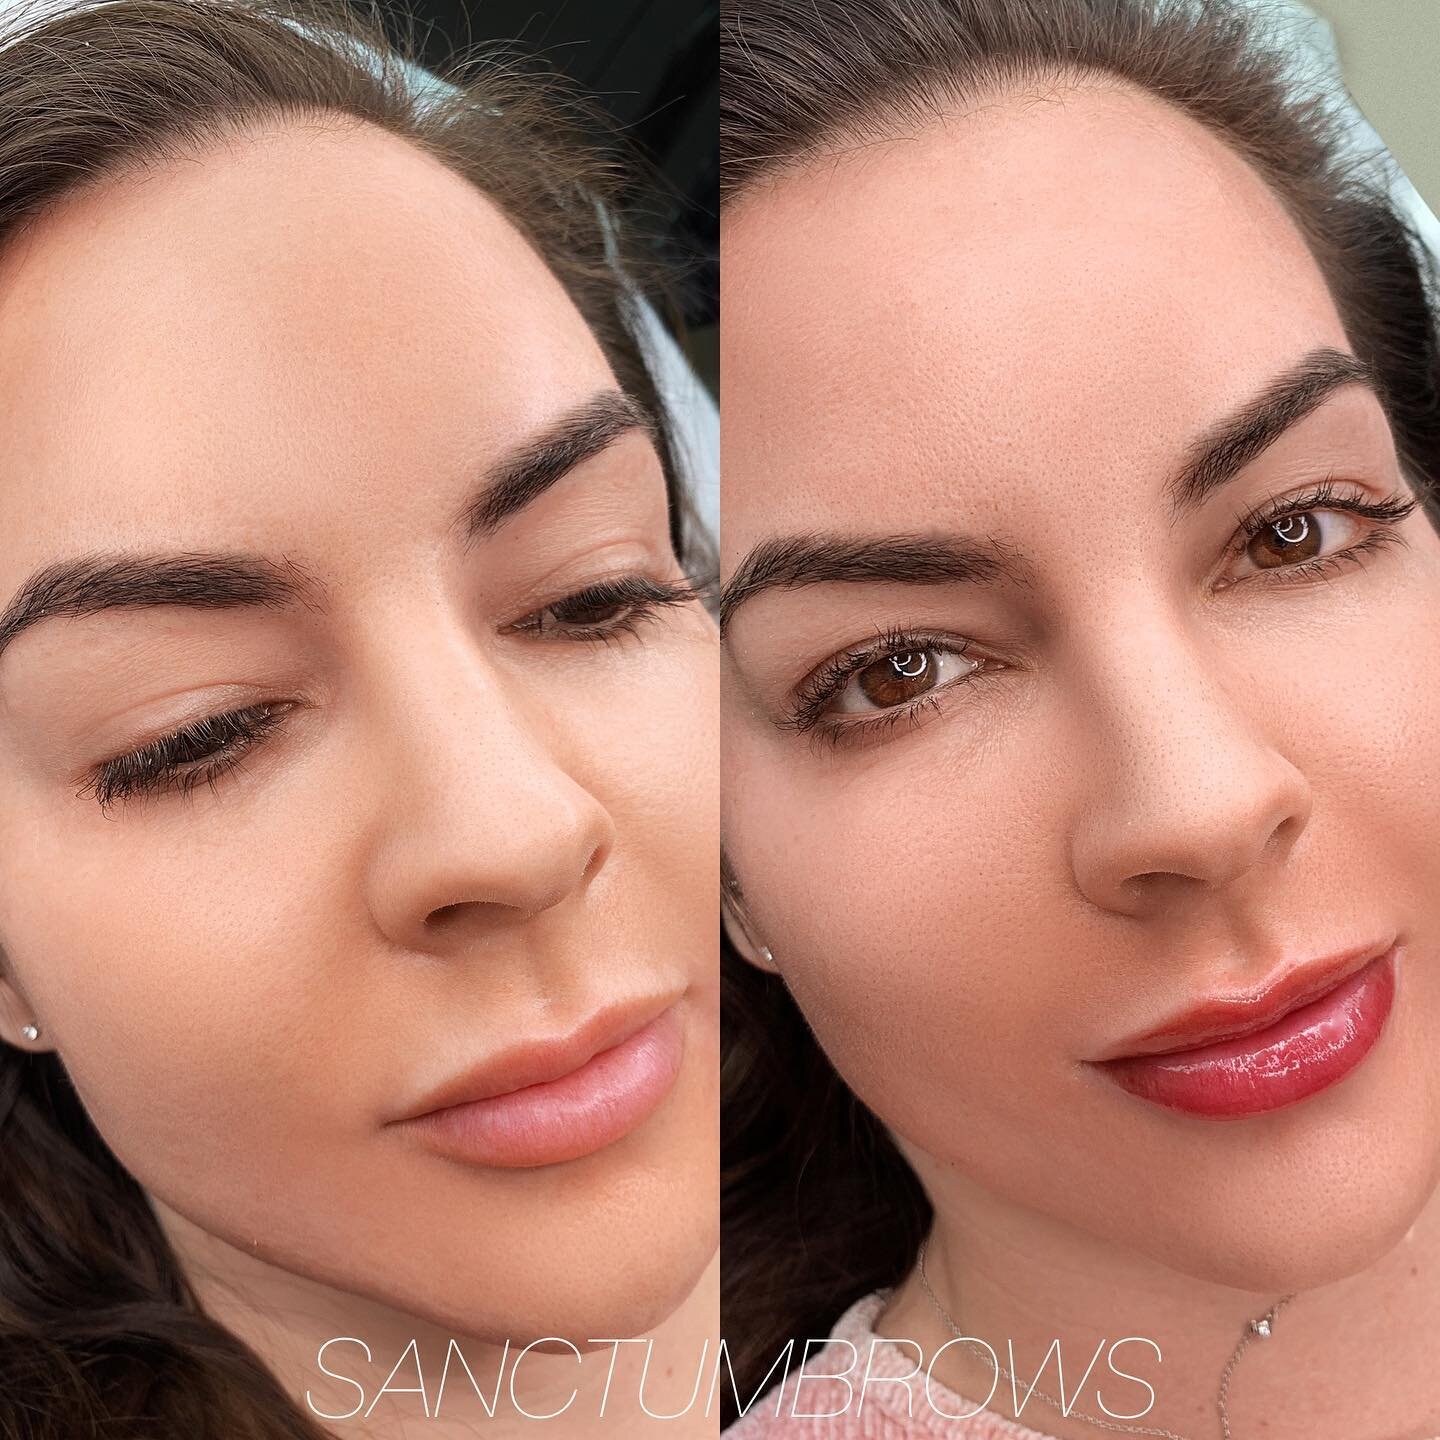 Lip Blush!

Color will initially appear vibrant, but will soften within a few weeks of the lips healing. This is a two, sometimes three step process (Depending on the saturation the client is trying to achieve or if dark tones need neutralization).

